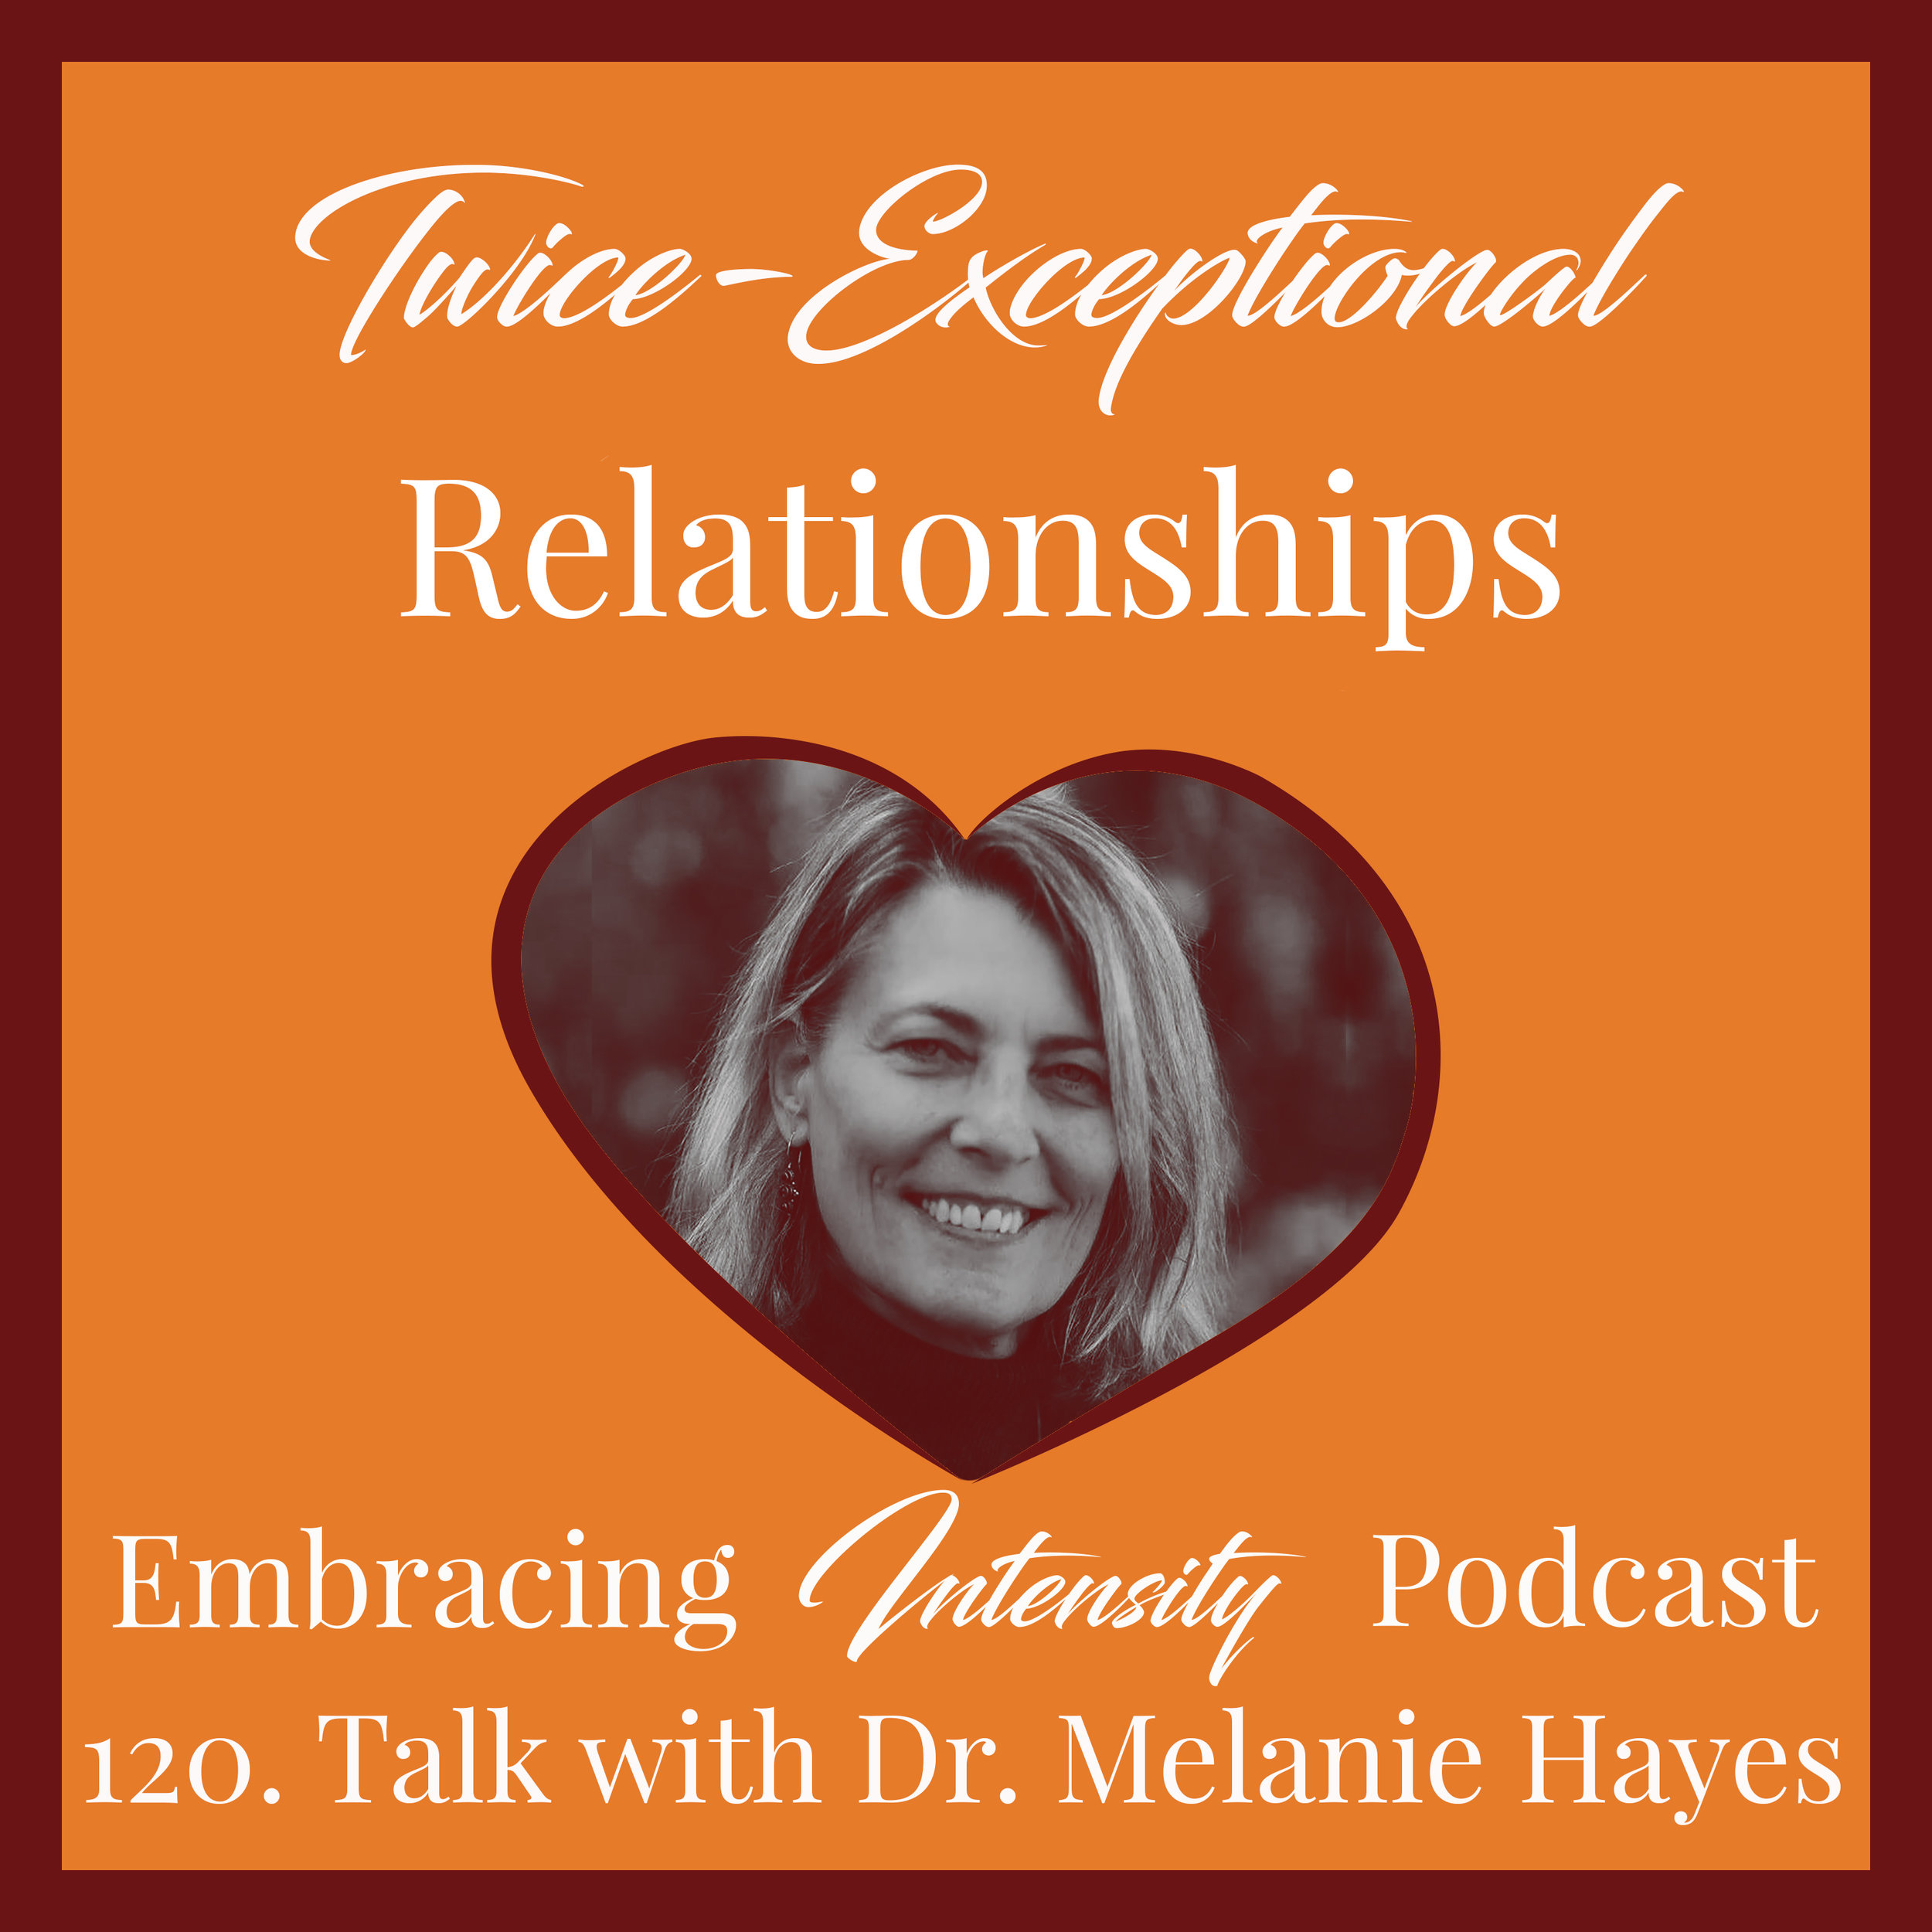 Twice Exceptional Relationships with Dr. Melanie Hayes